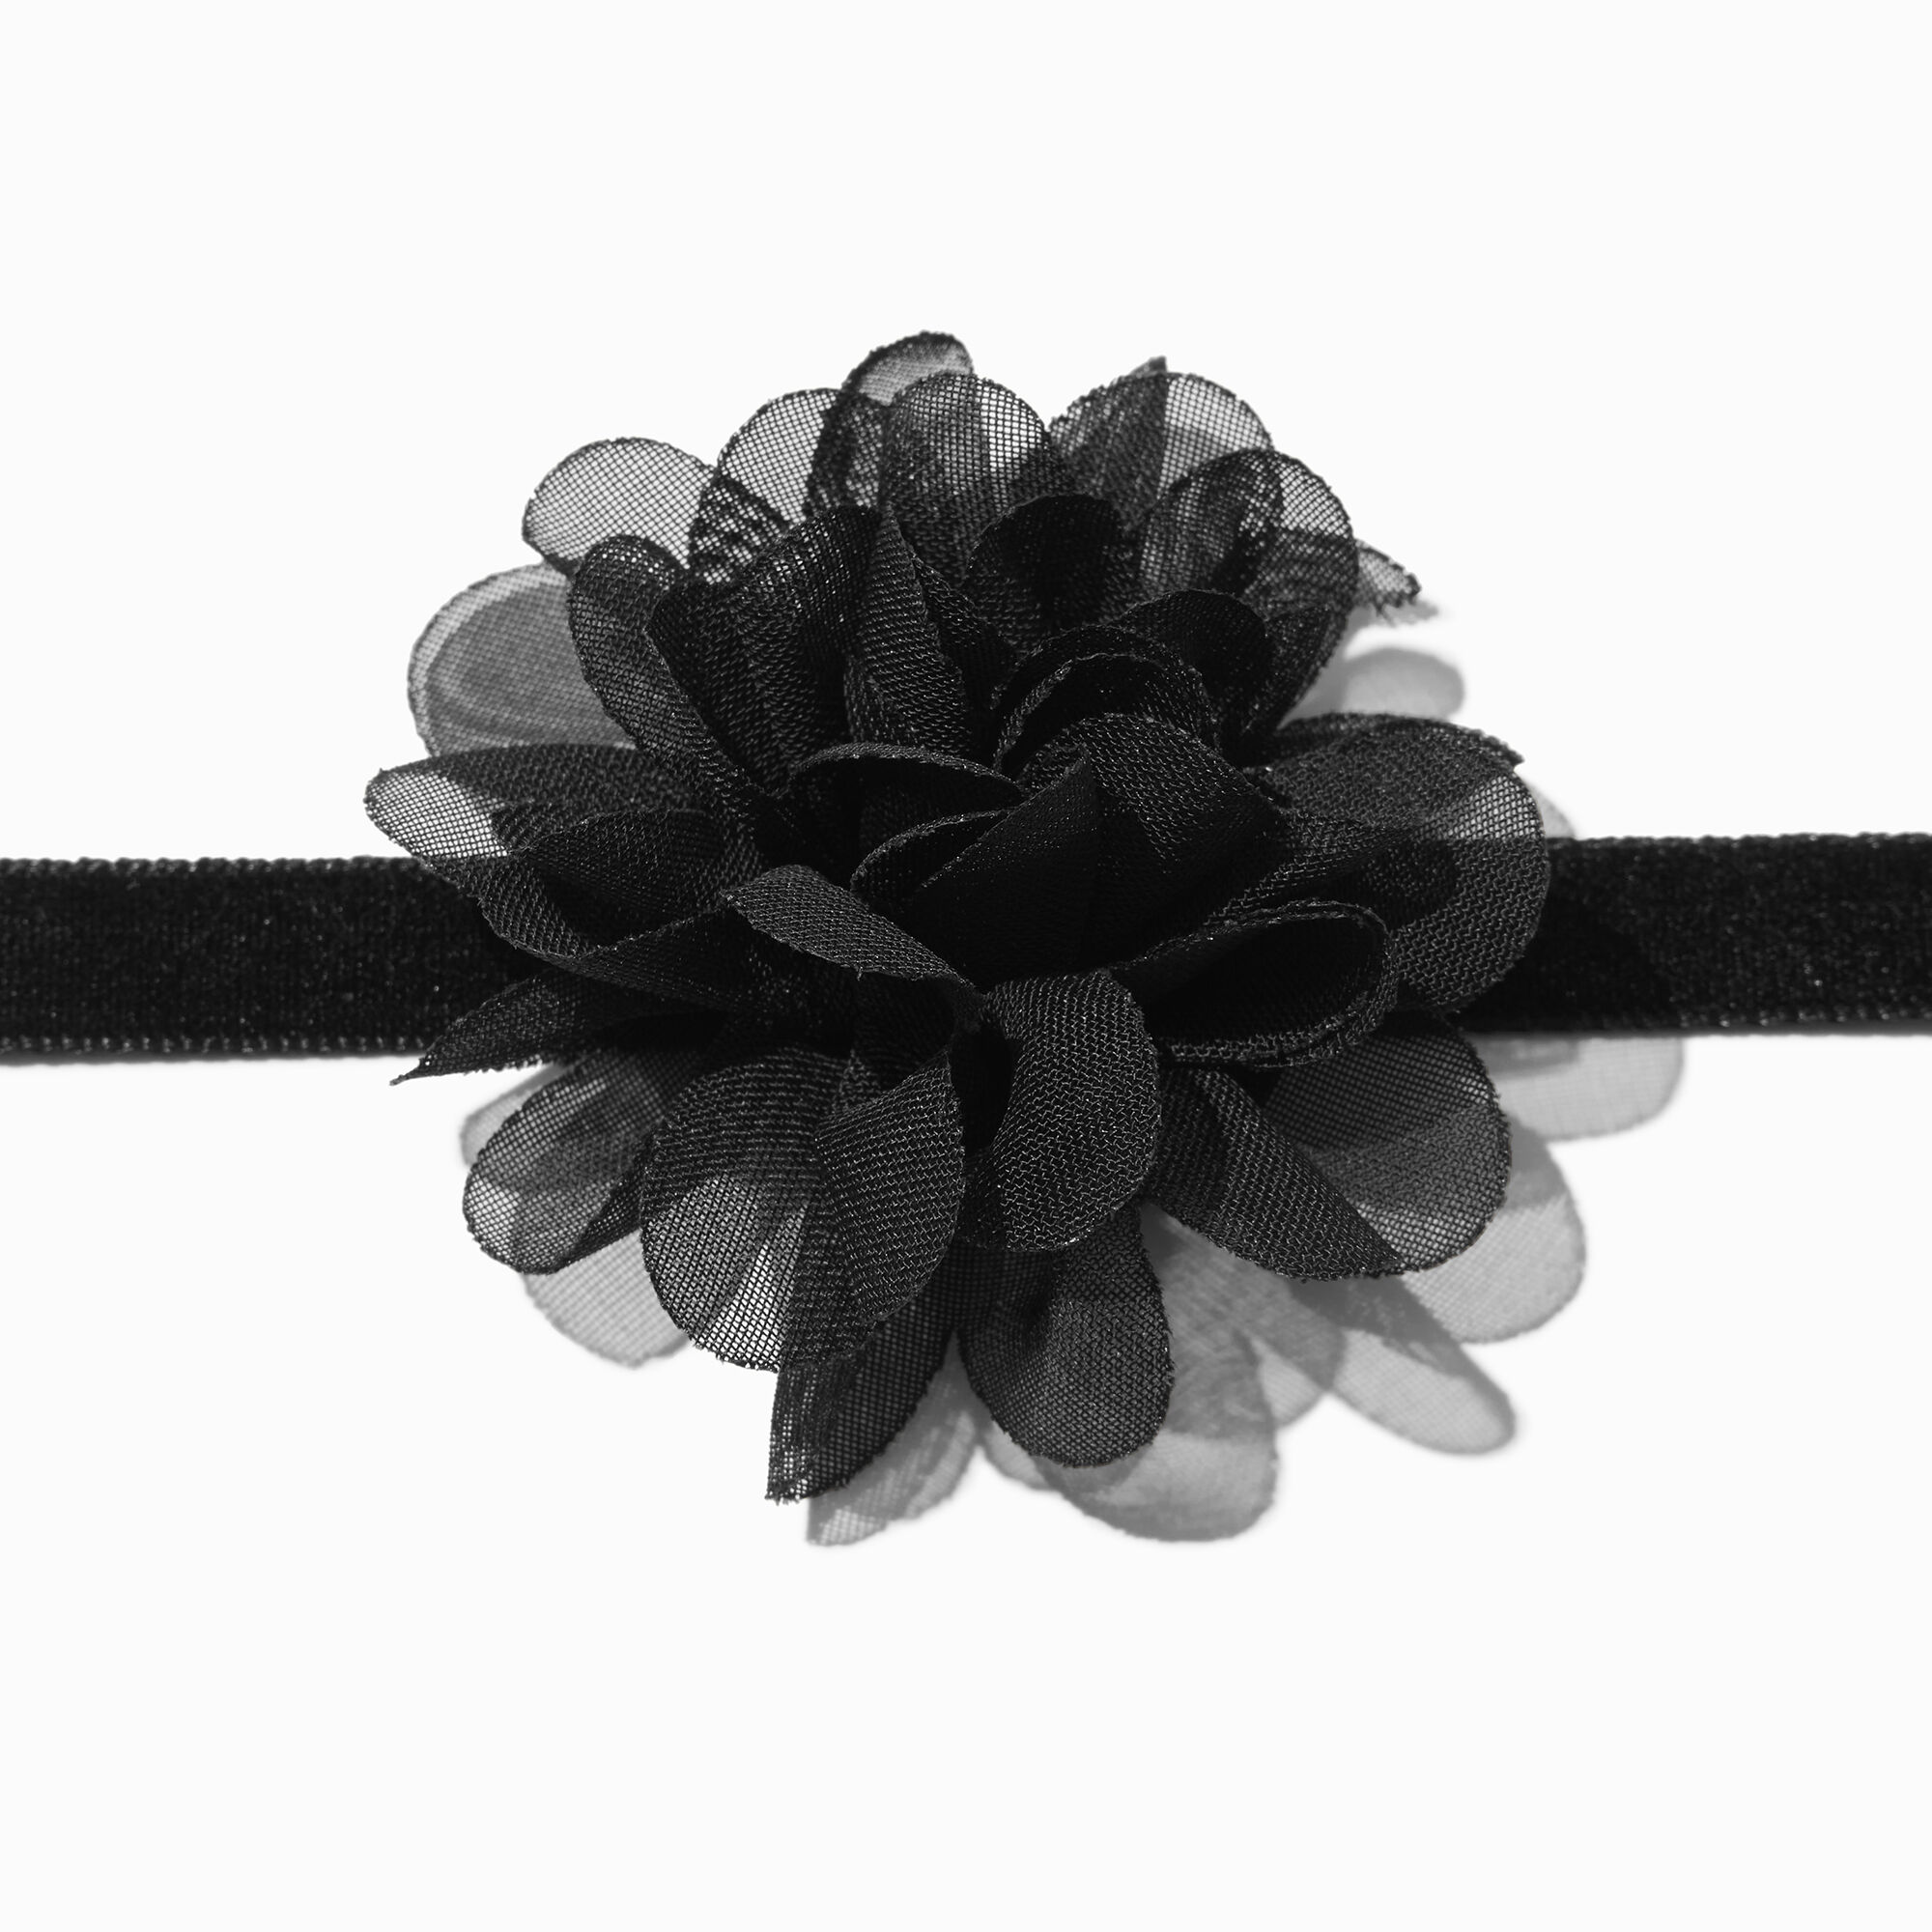 View Claires Chiffon Flower Choker Necklace Black information